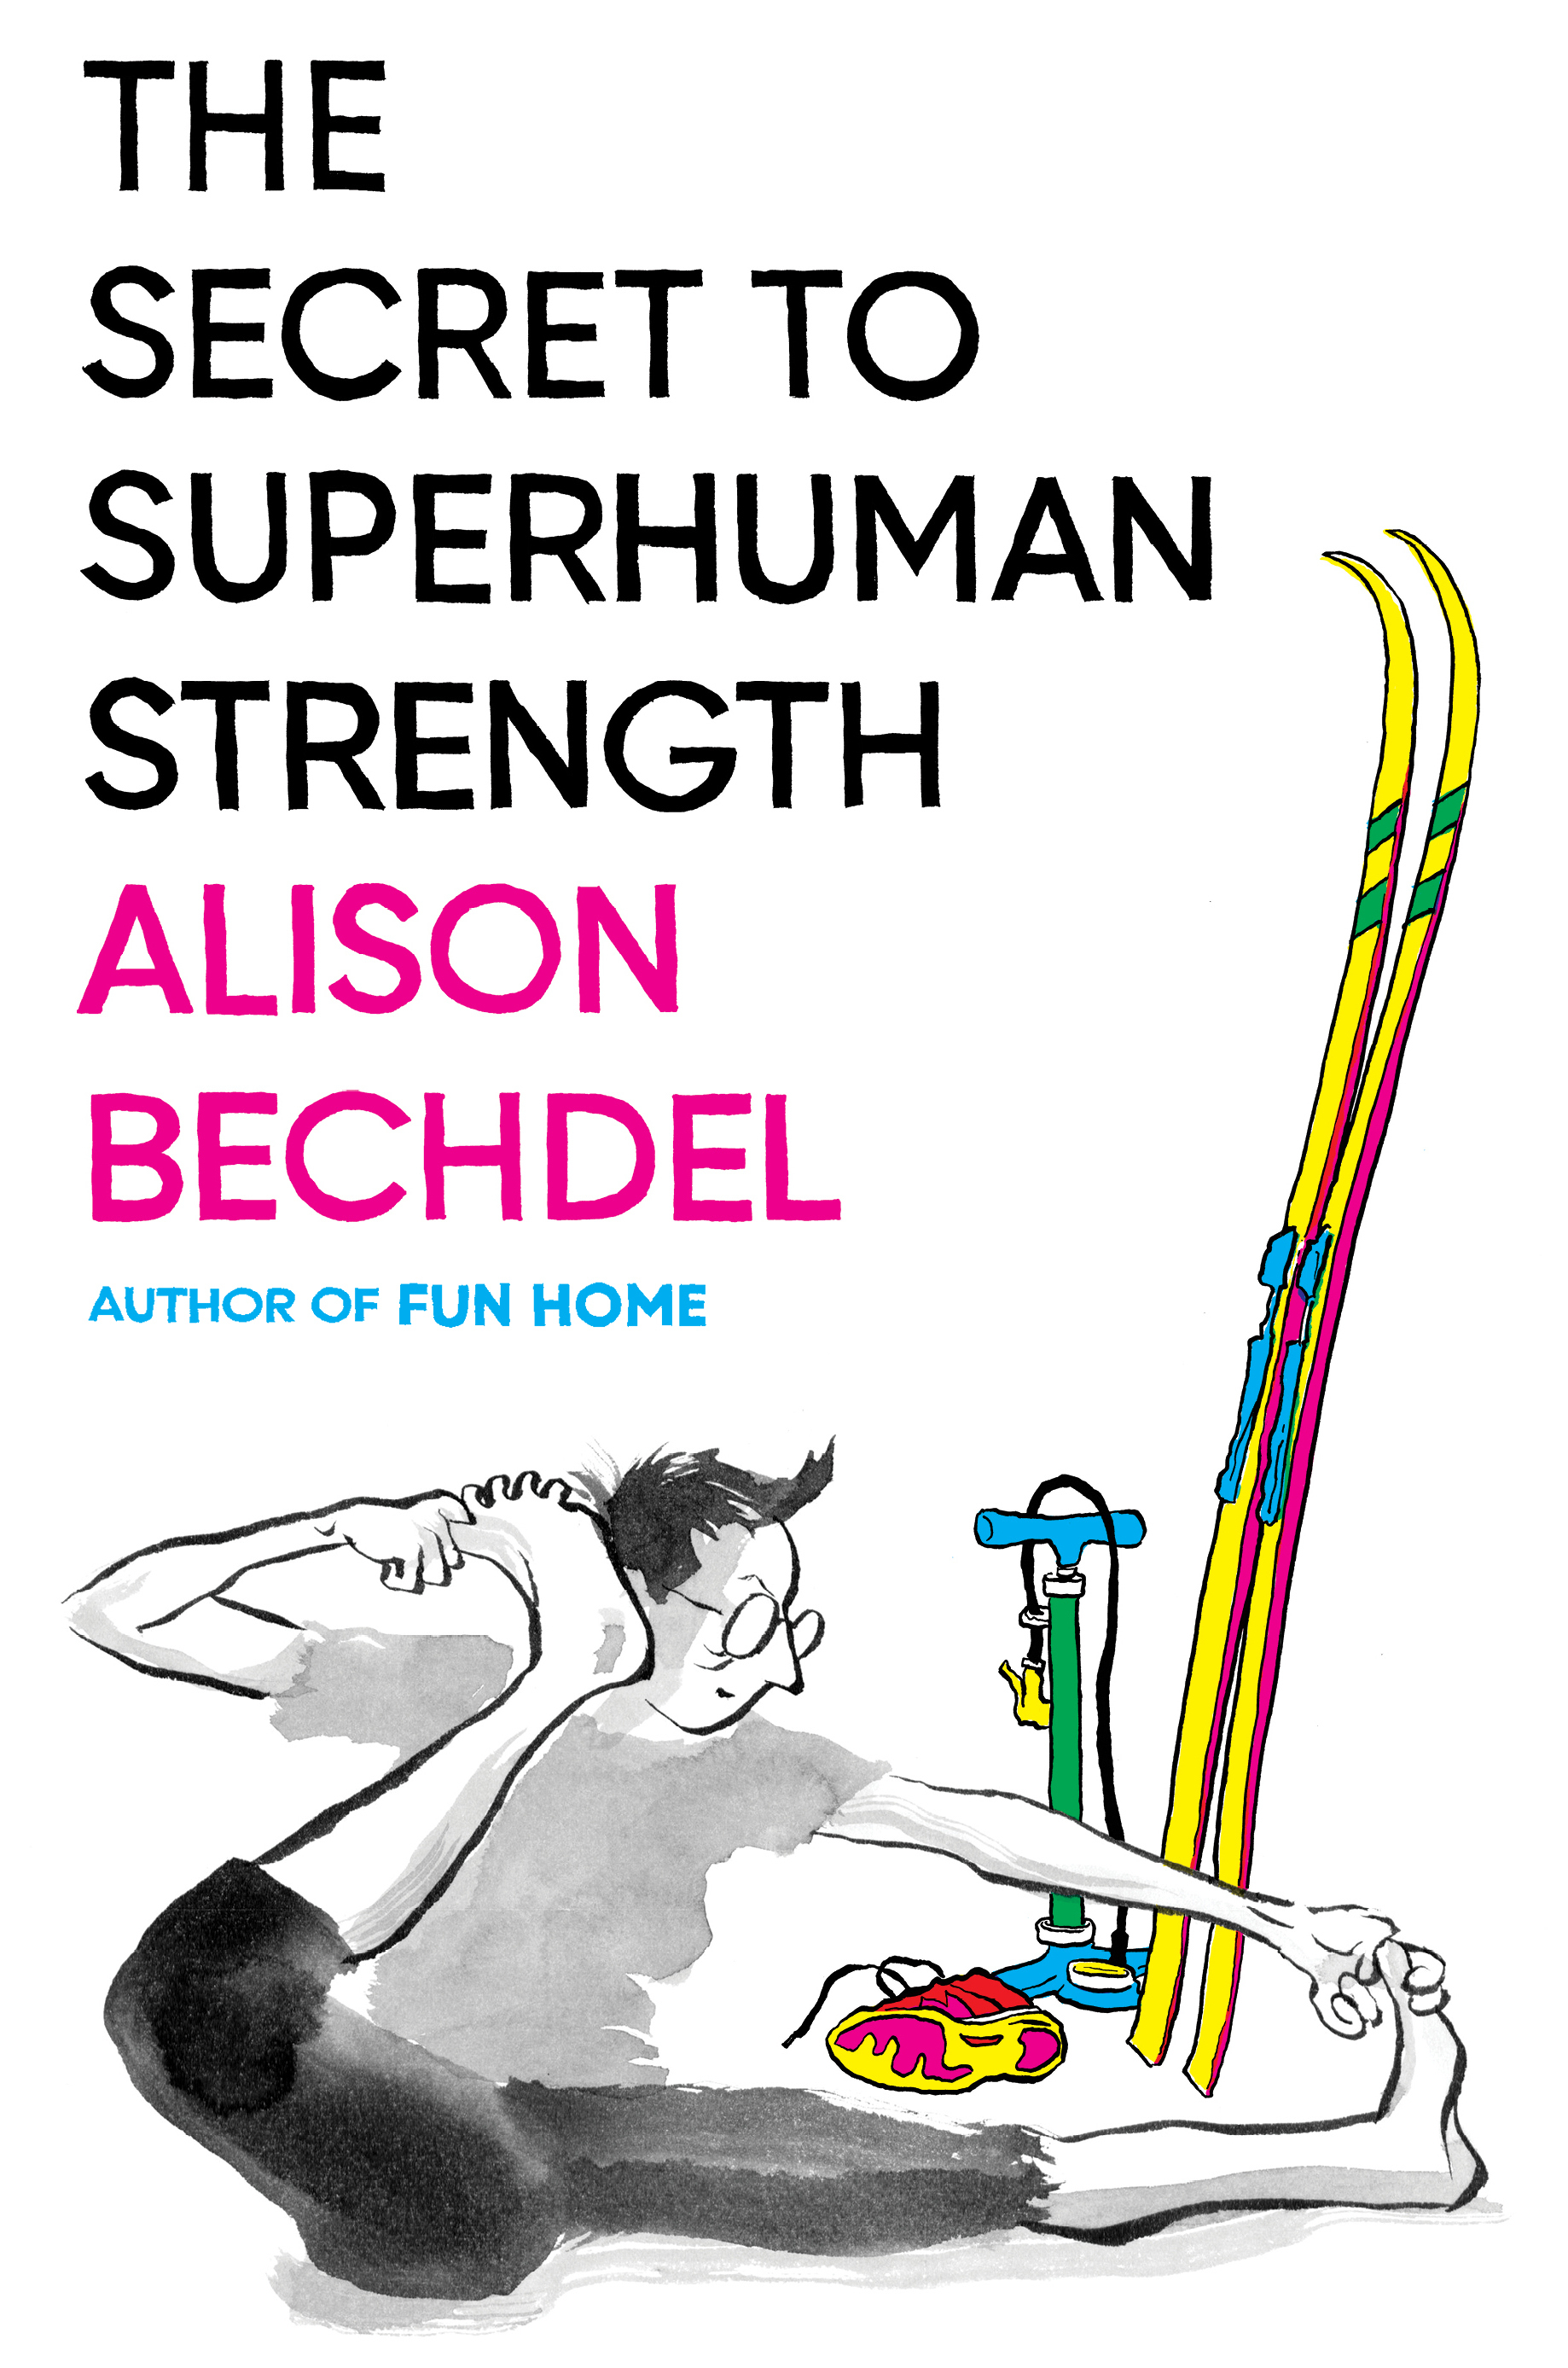 Cover Image for "The Secret to Superhuman Strength" 